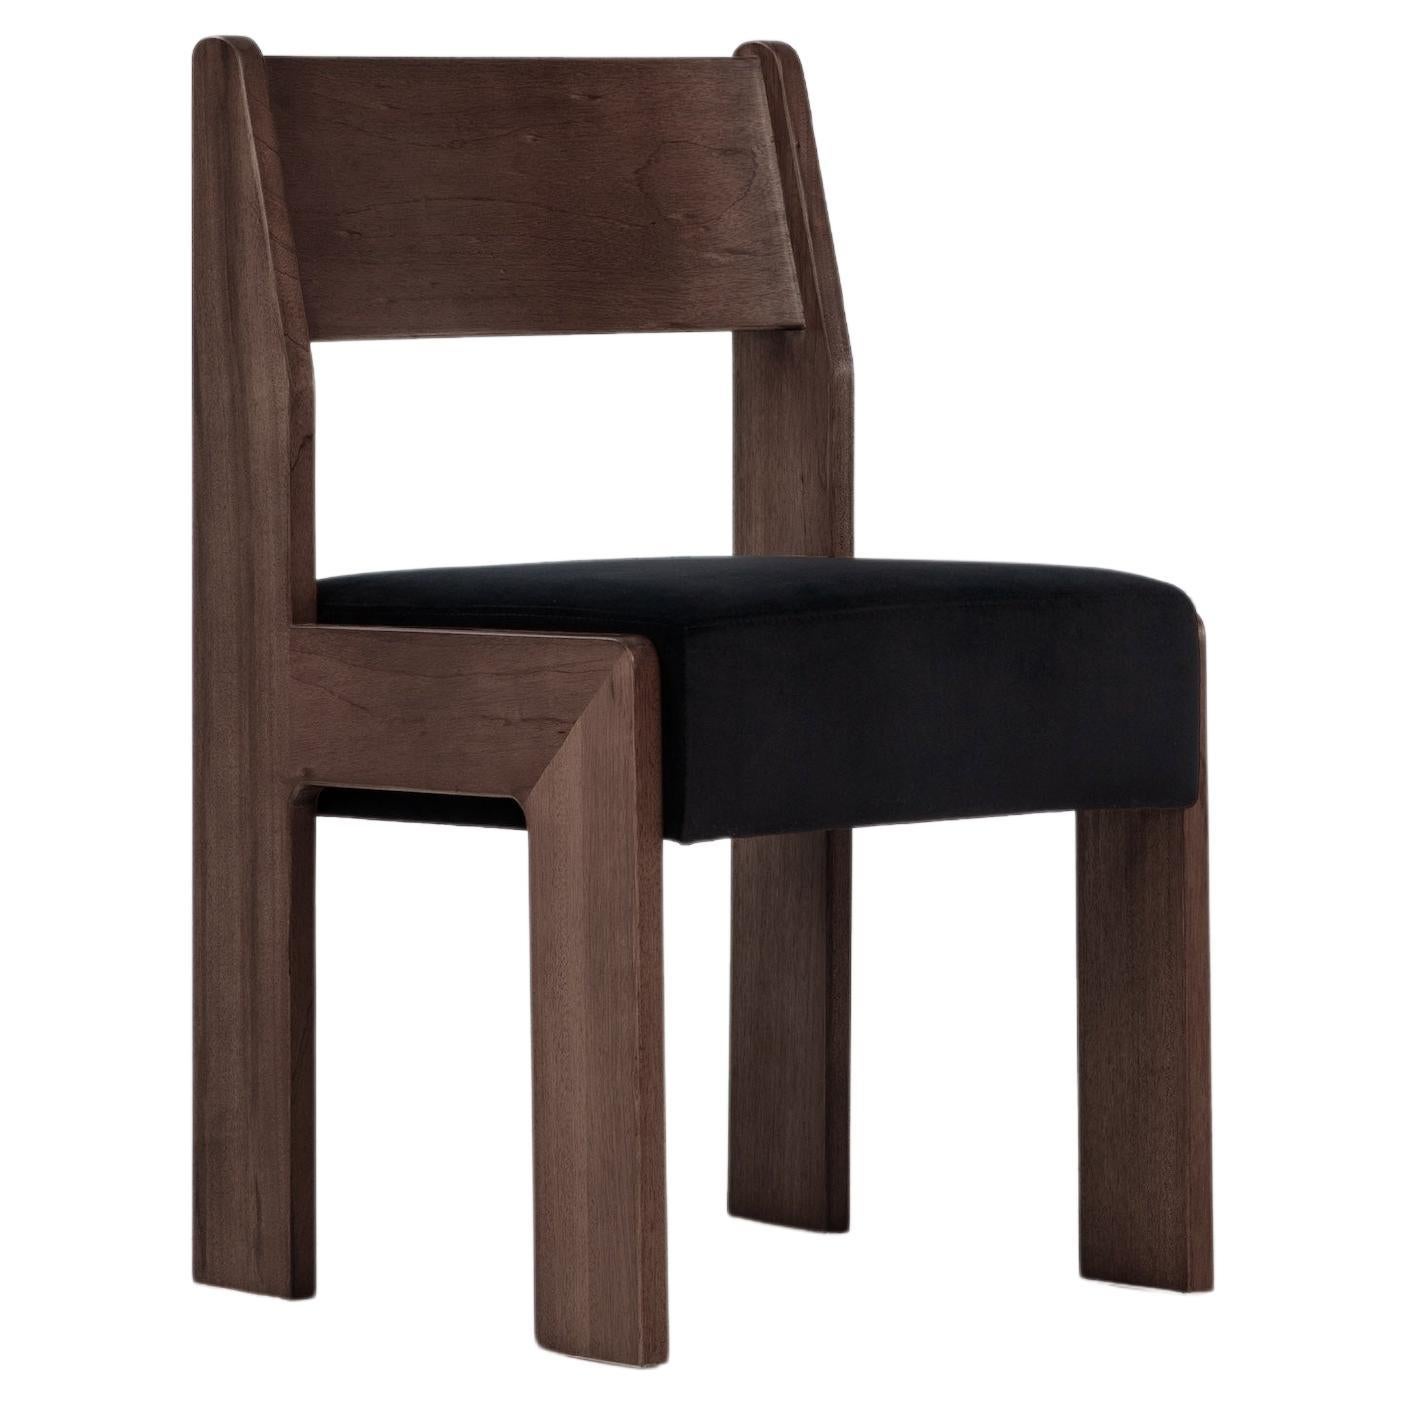 Reka Side Chair, Minimalist Velvet and Wood Dining Chair in Cocoa/Black